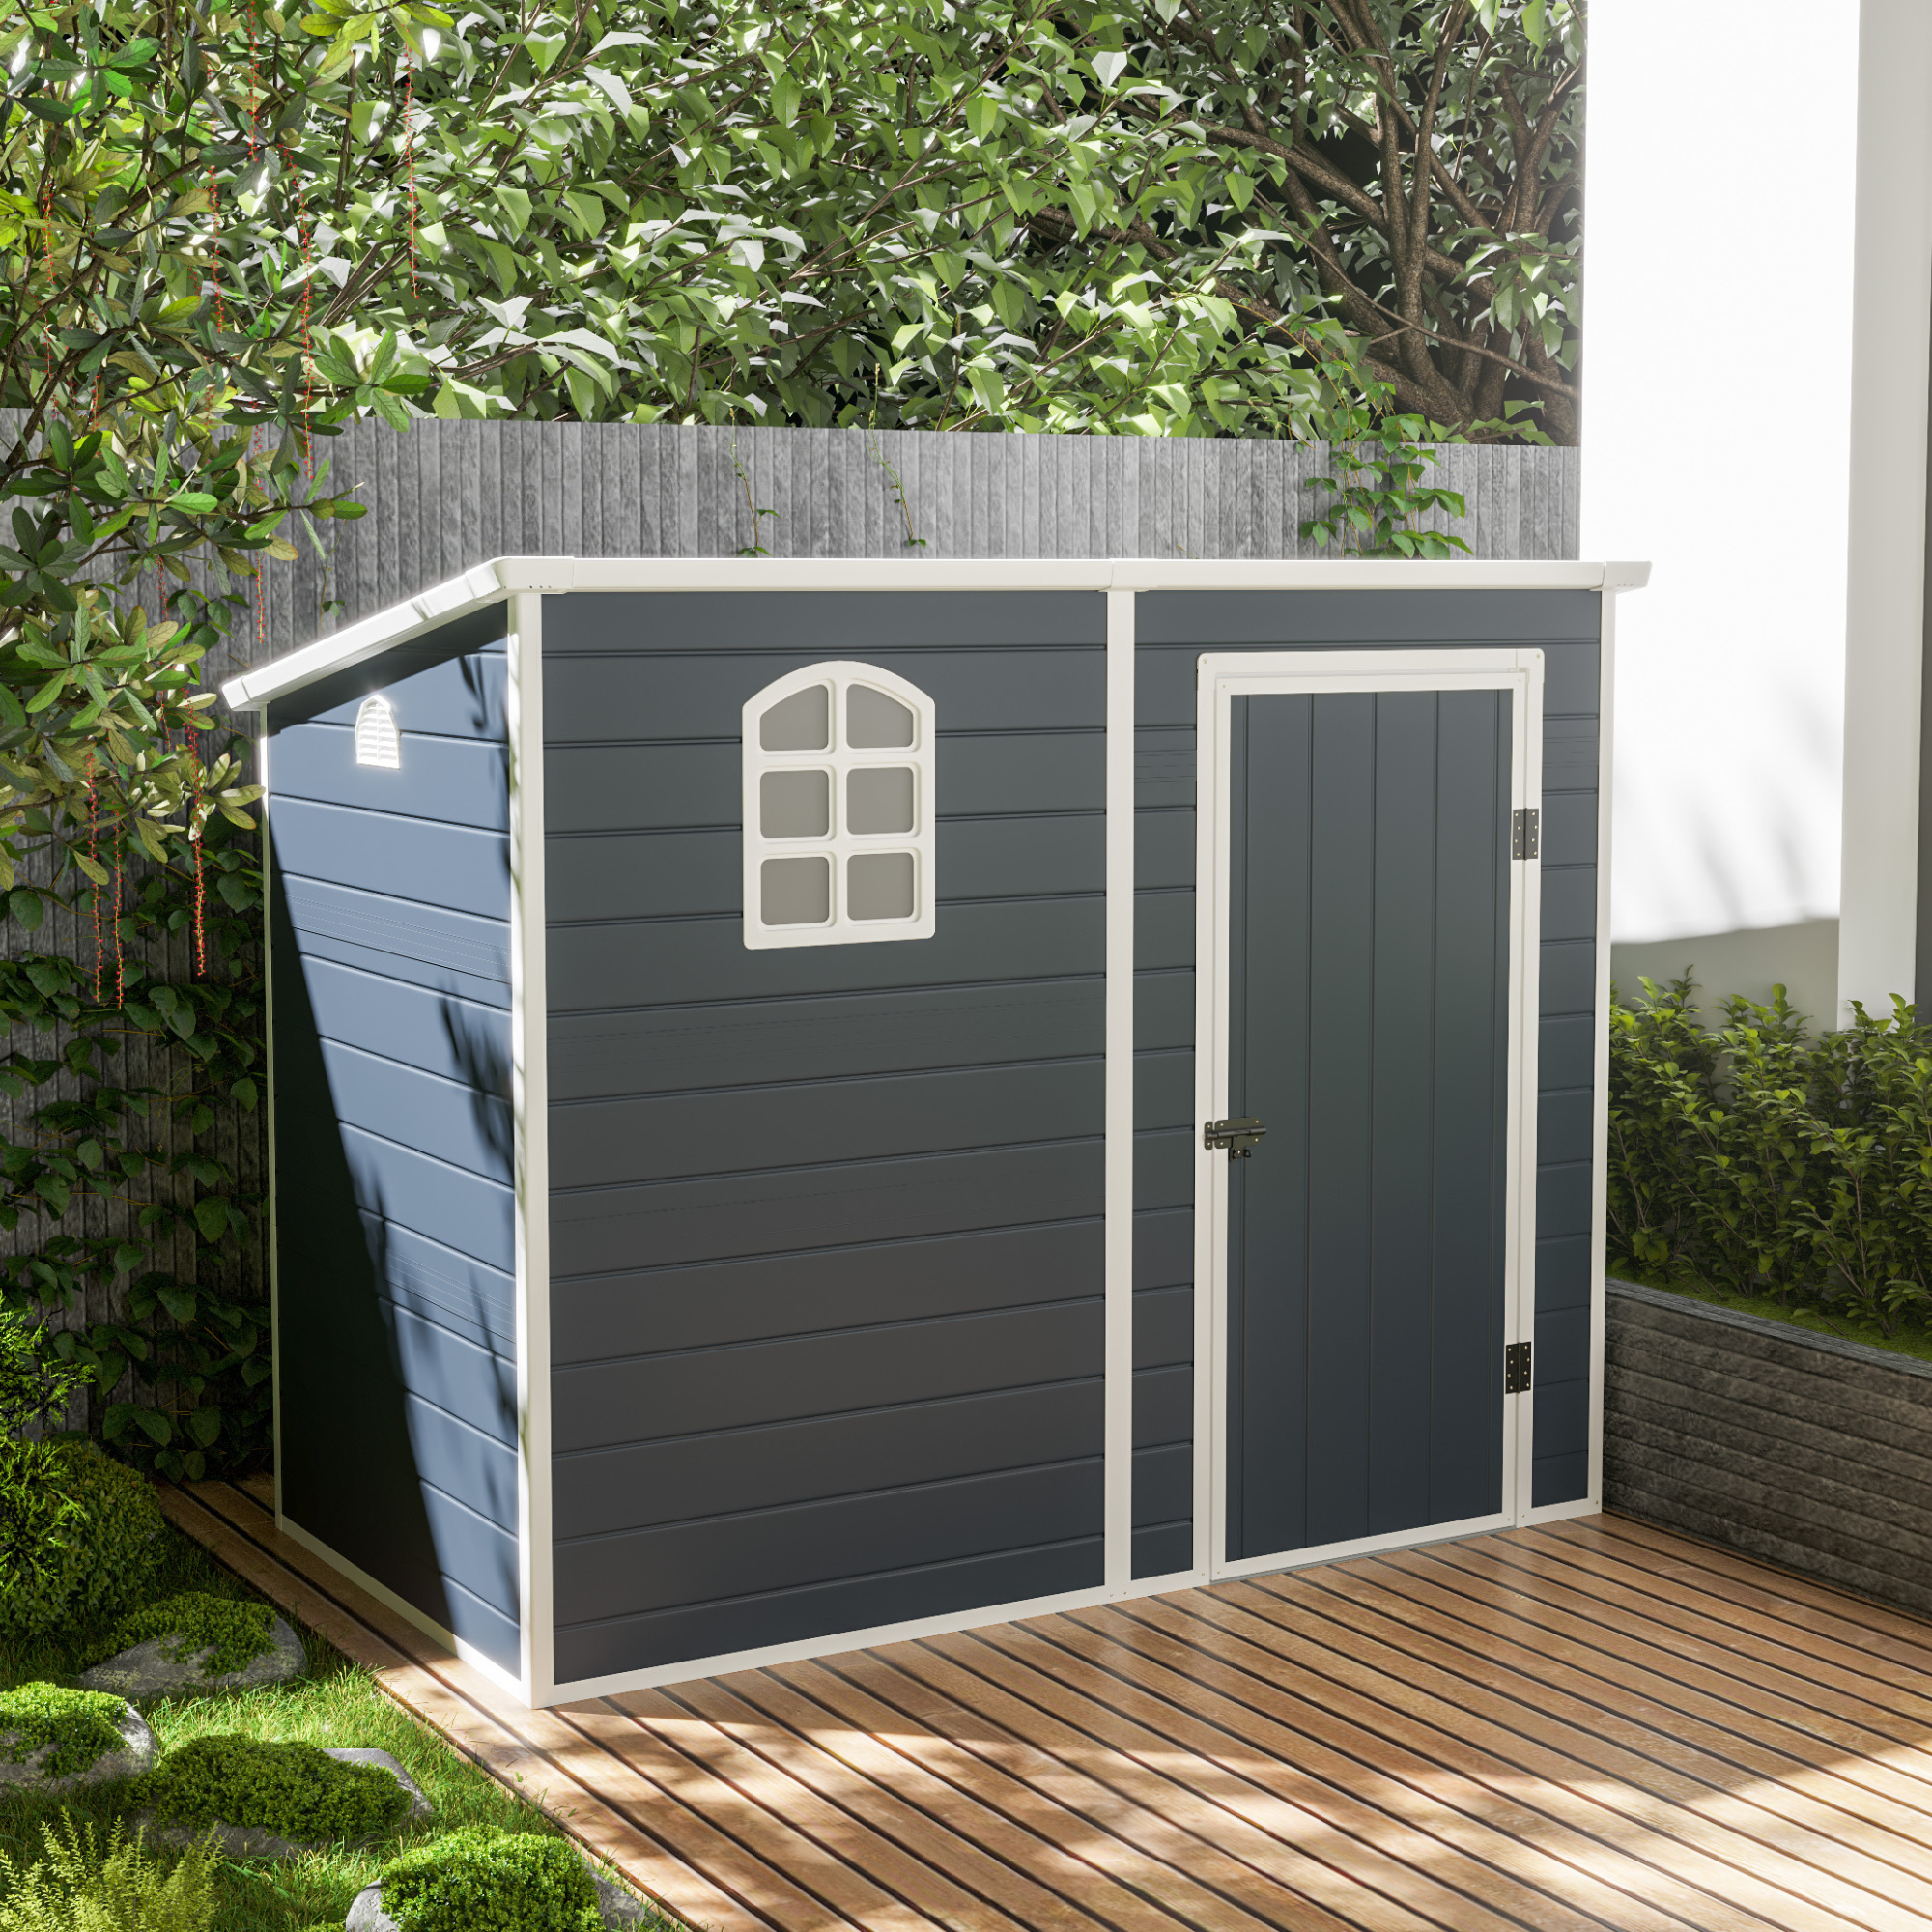 Jasmine 8x5ft Plastic Pent Shed with Foundation Kit - 8x5ft Plastic Pent Shed Light Grey